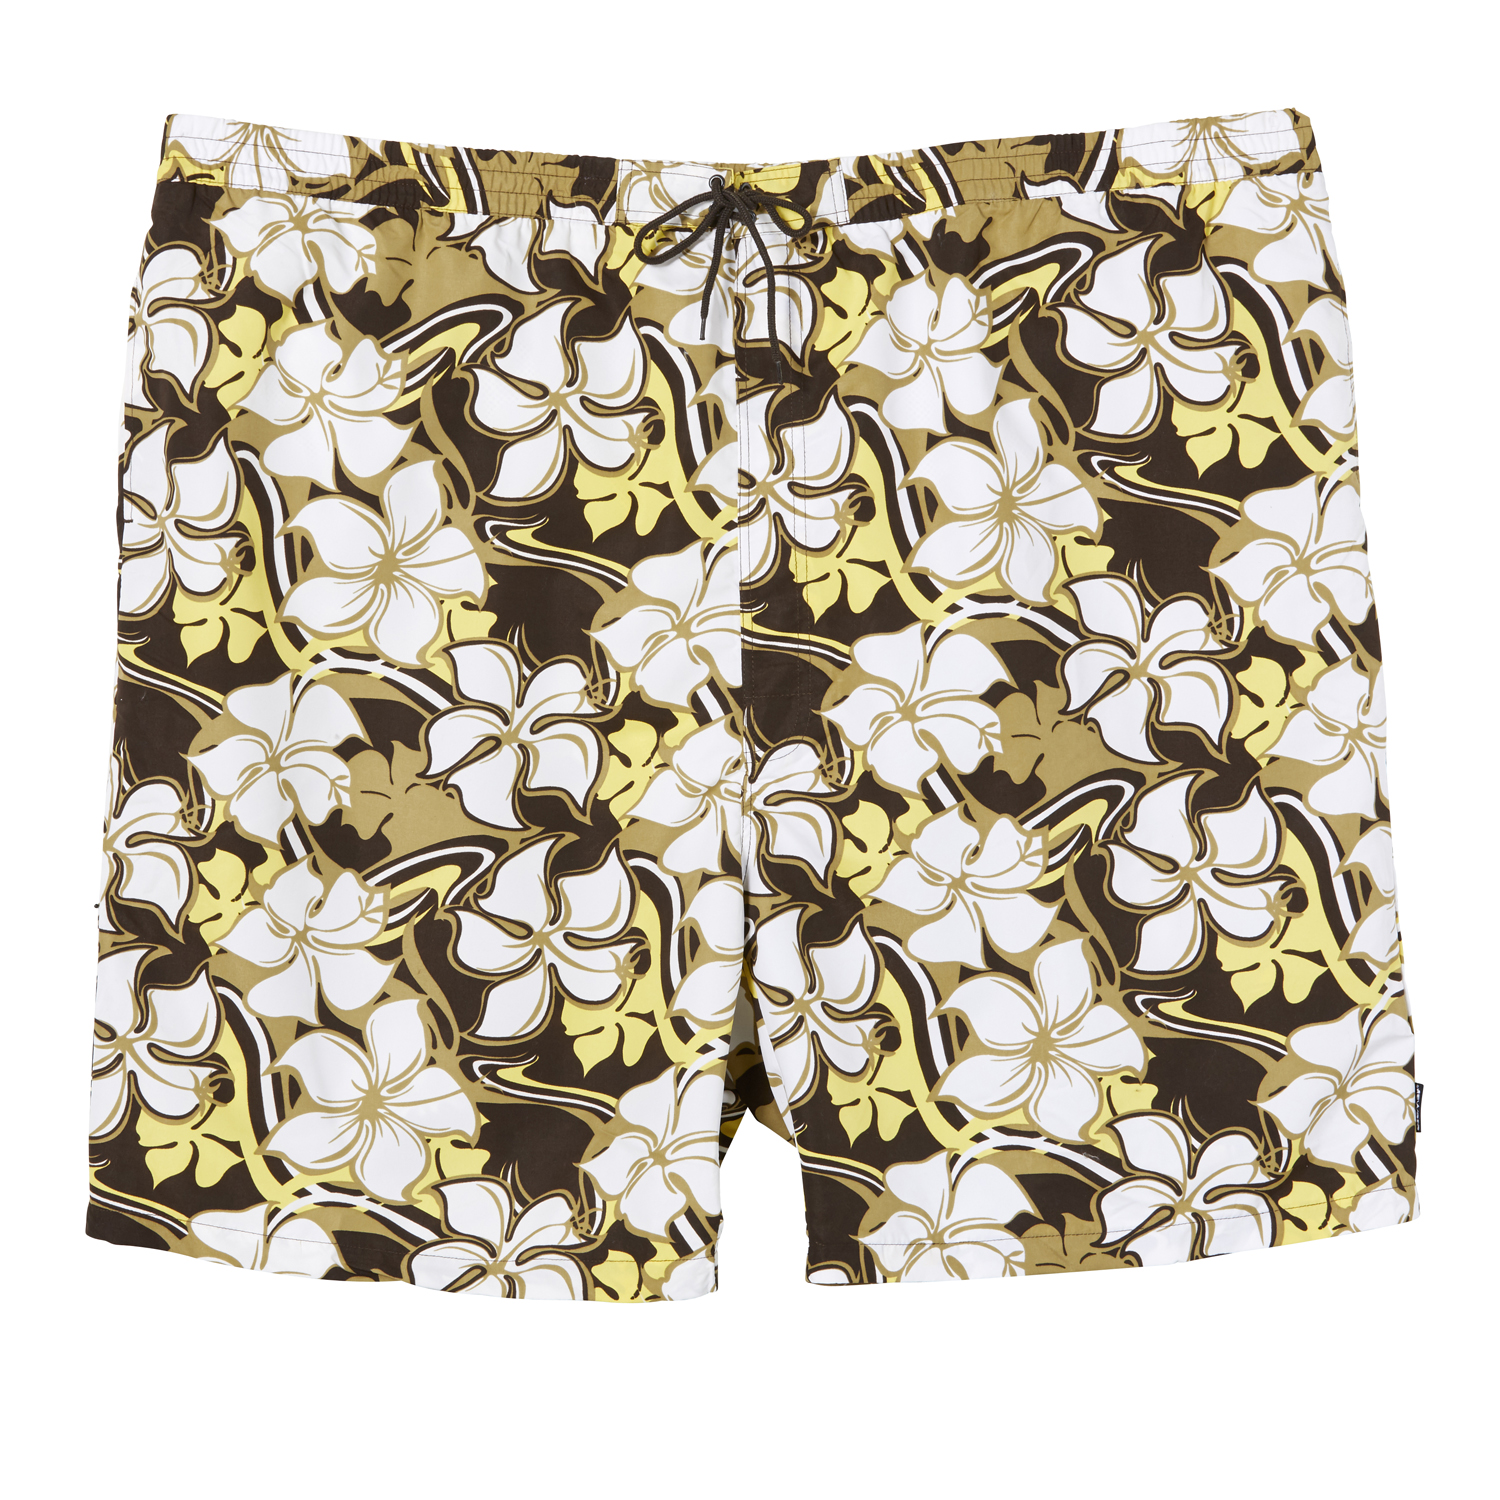 Swim bermudas by eleMar for men brown patterned in oversizes up to 9XL